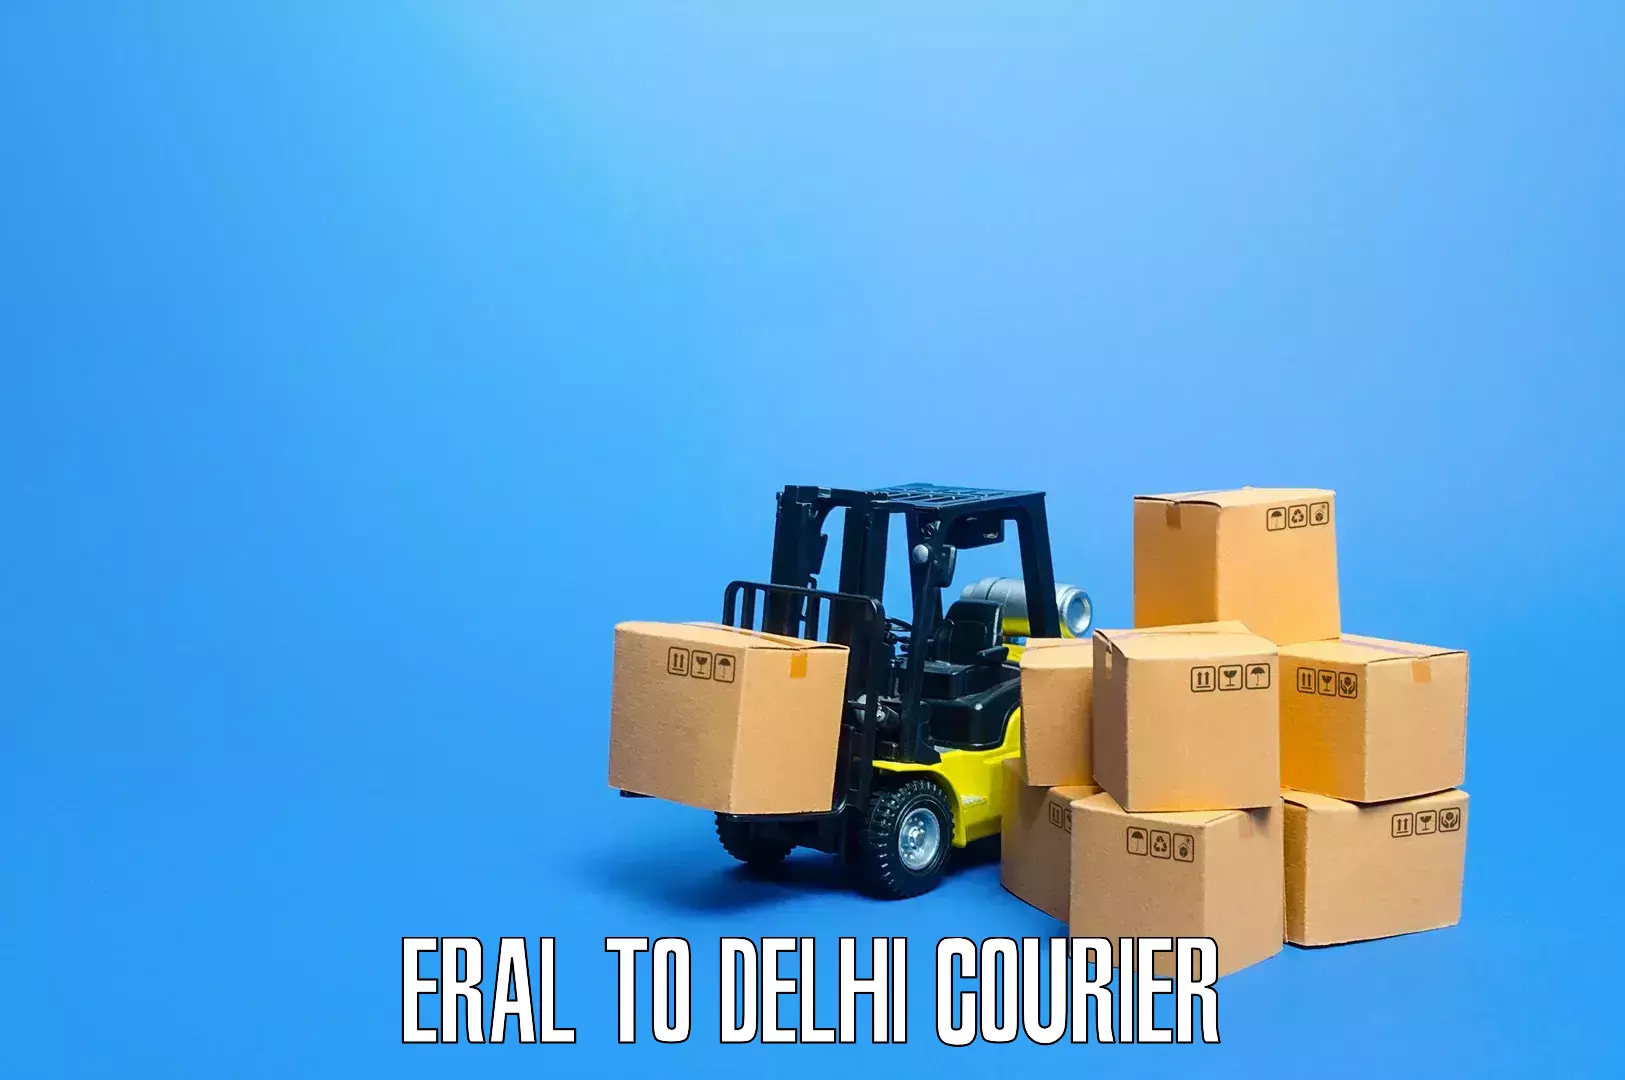 Professional moving assistance in Eral to Delhi